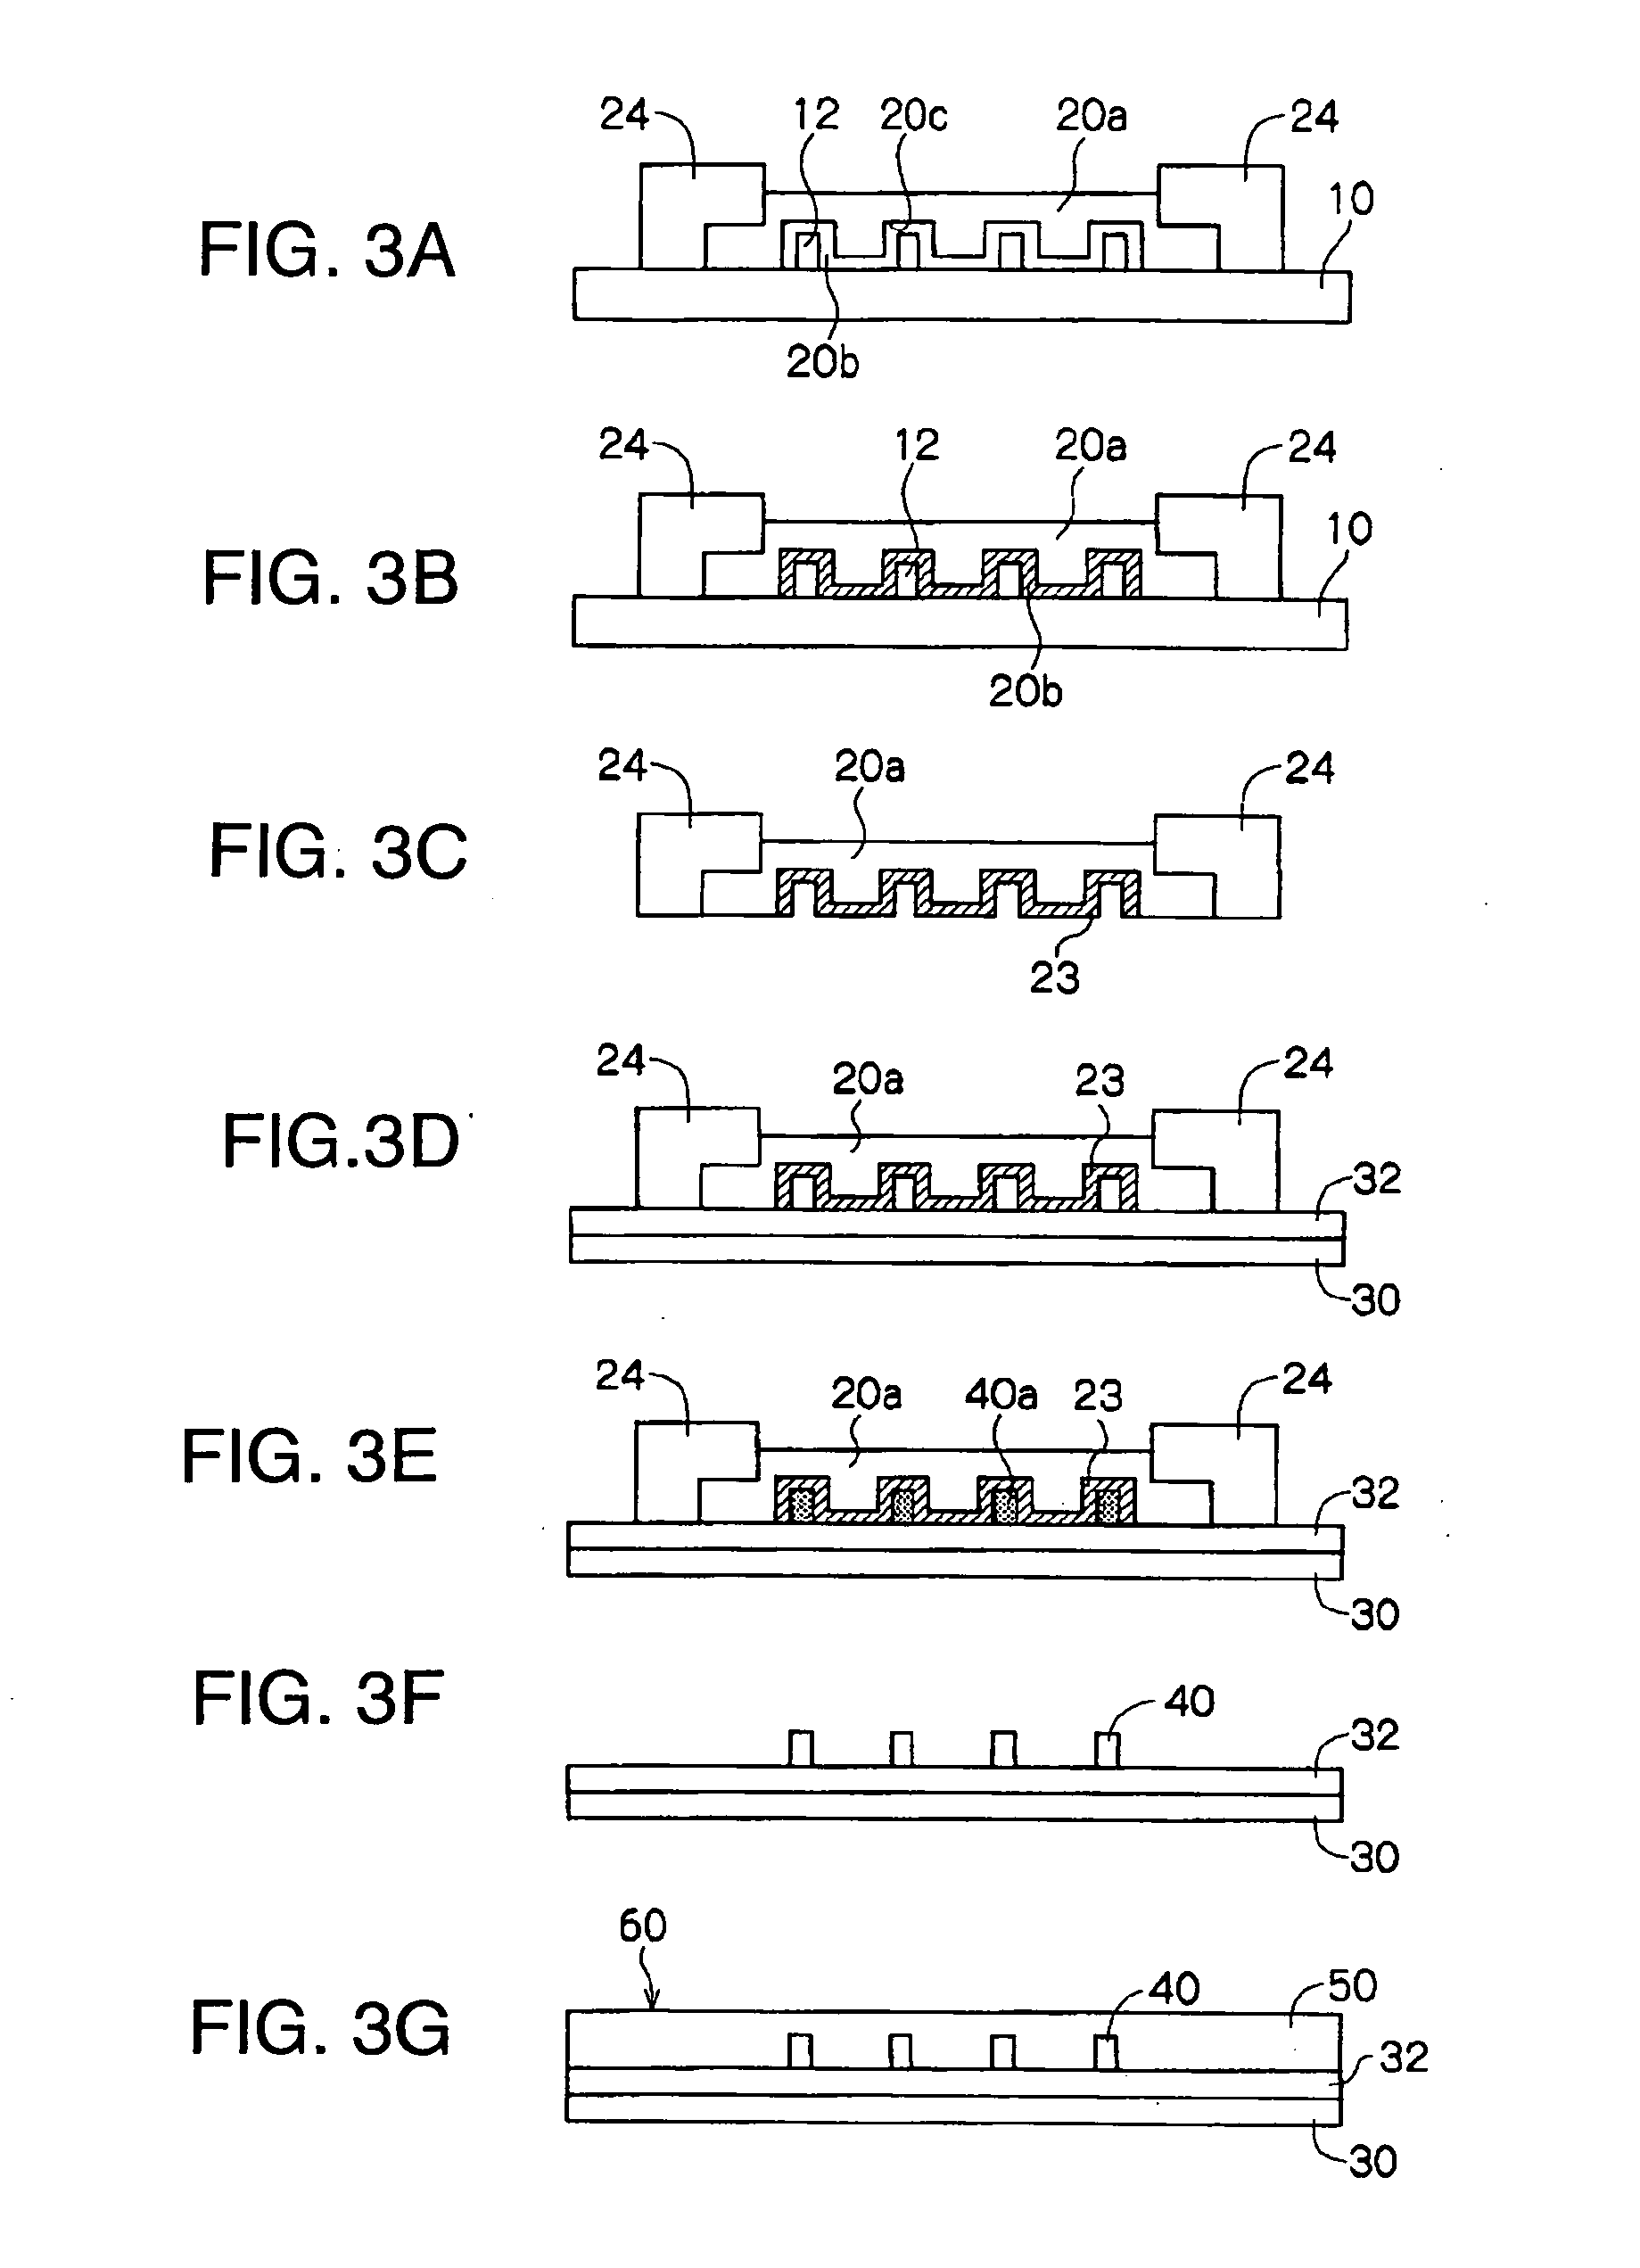 Process for producing polymer optical waveguide